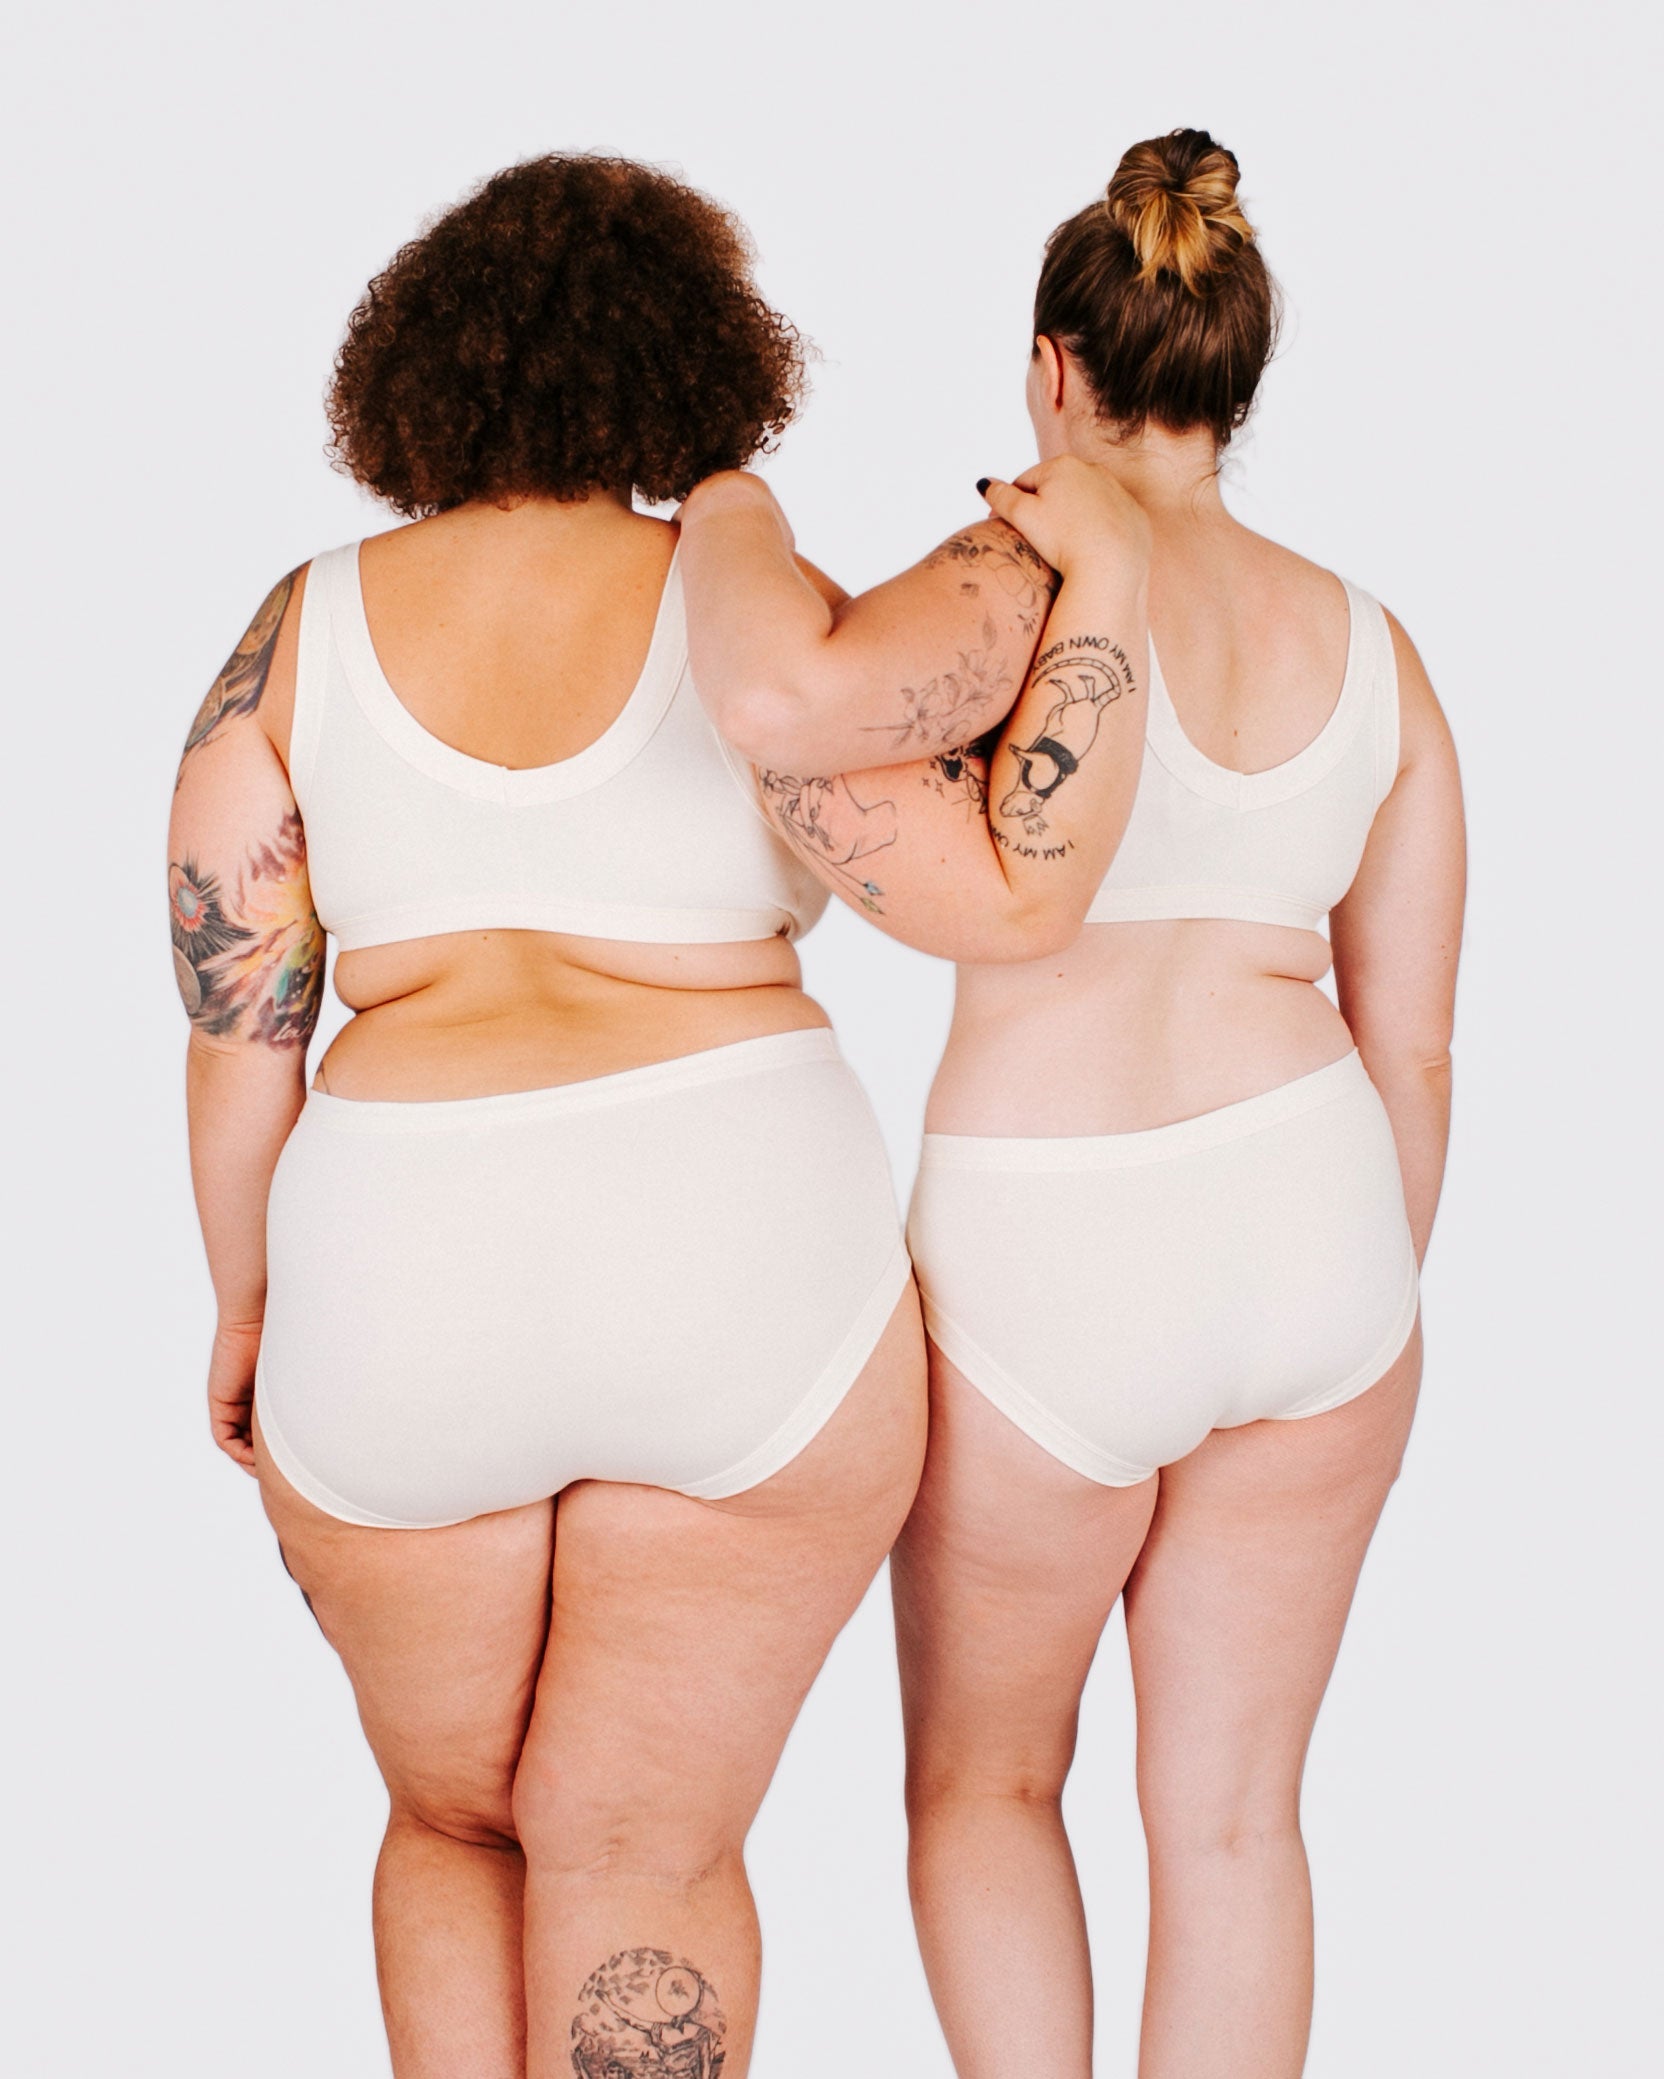 Fit photo from the back of Thunderpants organic cotton Hipster style underwear and Bralette in off-white on two model standing together.